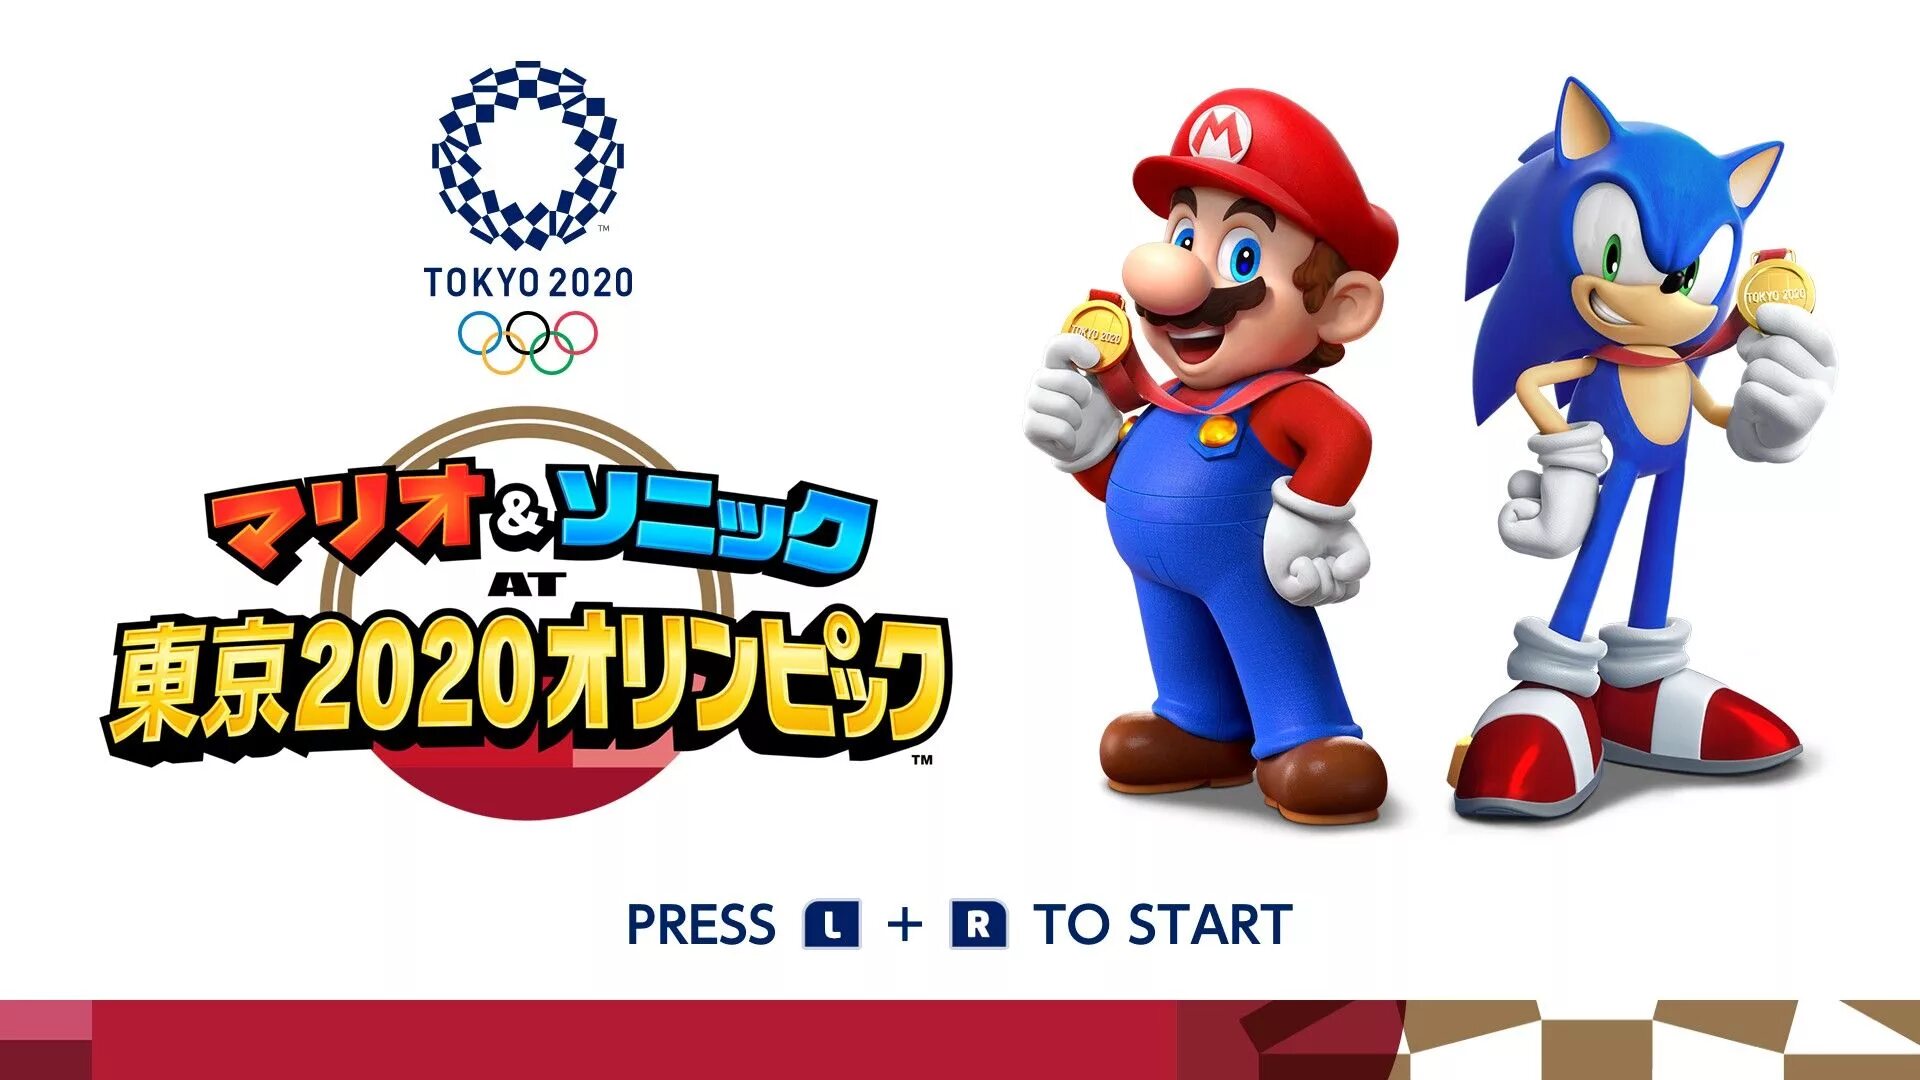 Mario and Sonic at the Olympic games Tokyo 2020. Марио и Соник на Олимпийских играх. Марио Соник 2020. Mario & Sonic at the Olympic games. Олимпийский марио и соник